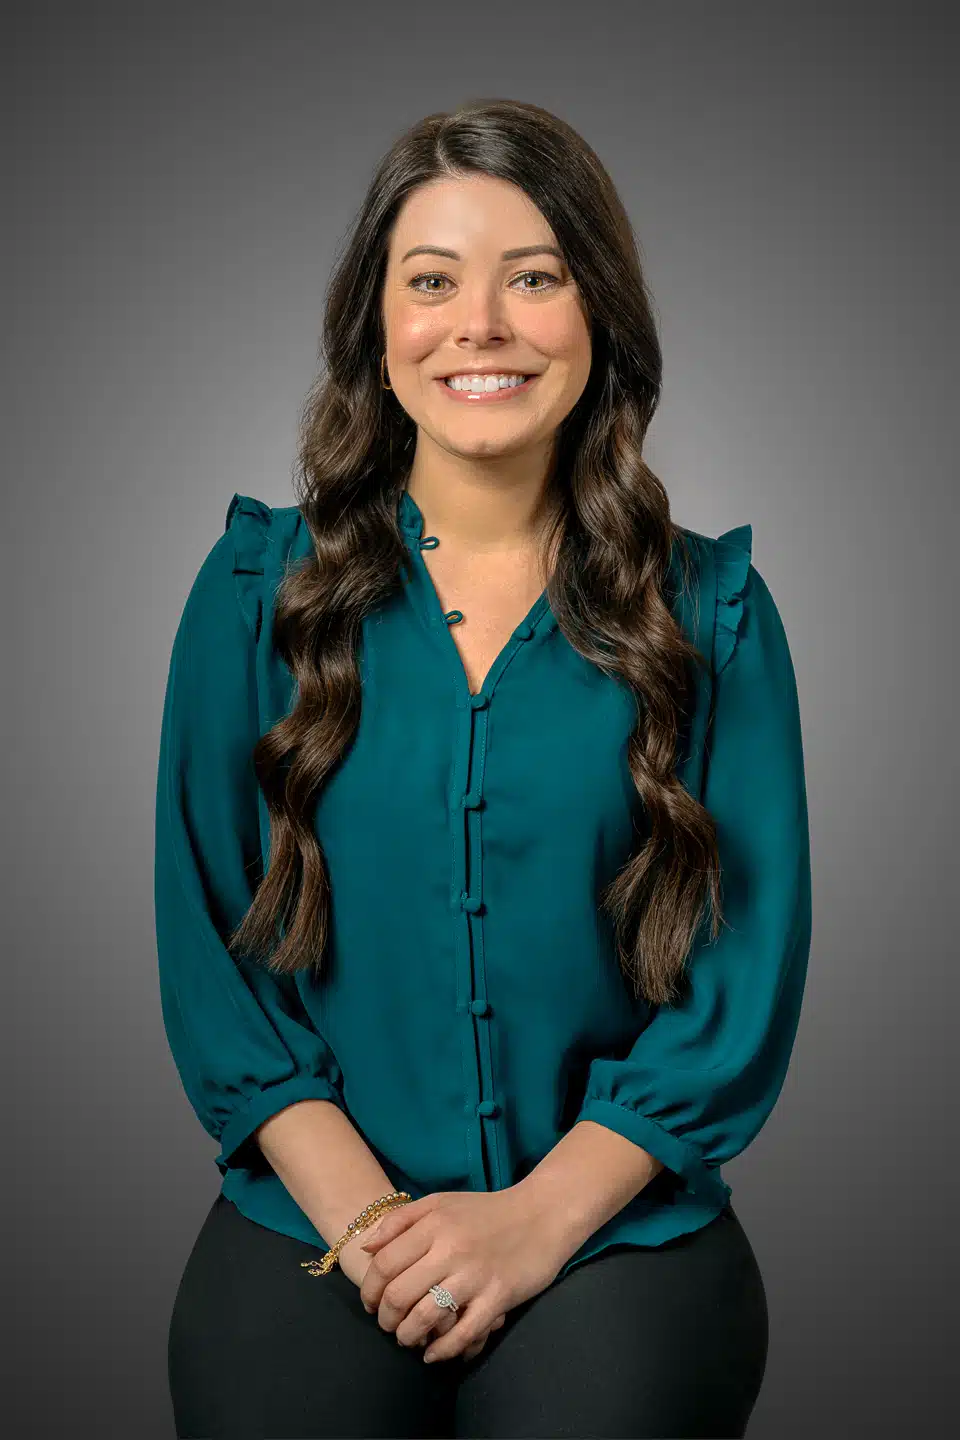 Professional headshot of a businesswoman with a friendly demeanor, wearing a teal blouse